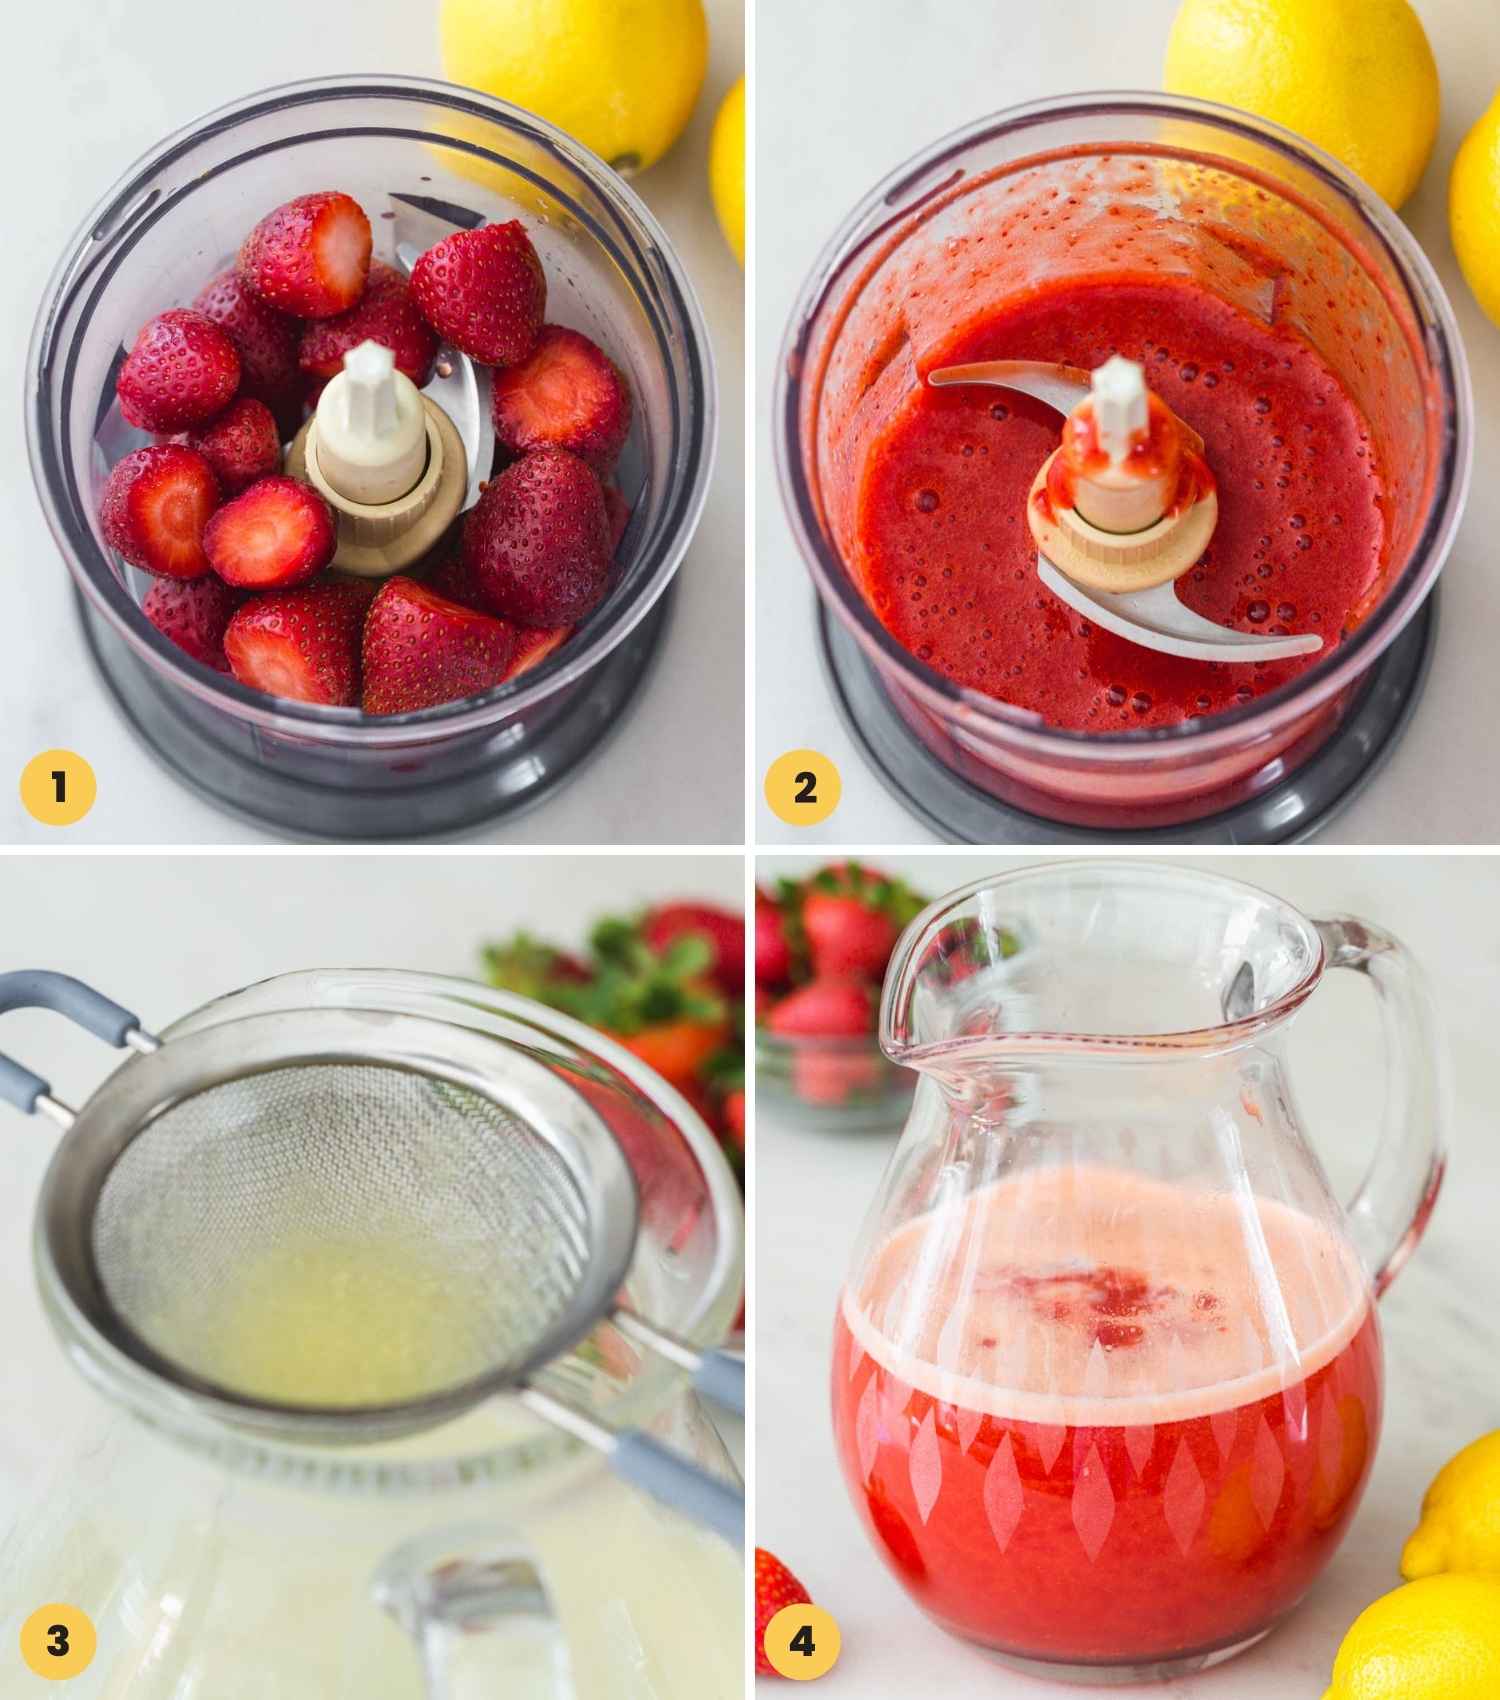 A collage with 4 images showing how to blend strawberries and make a lemonade